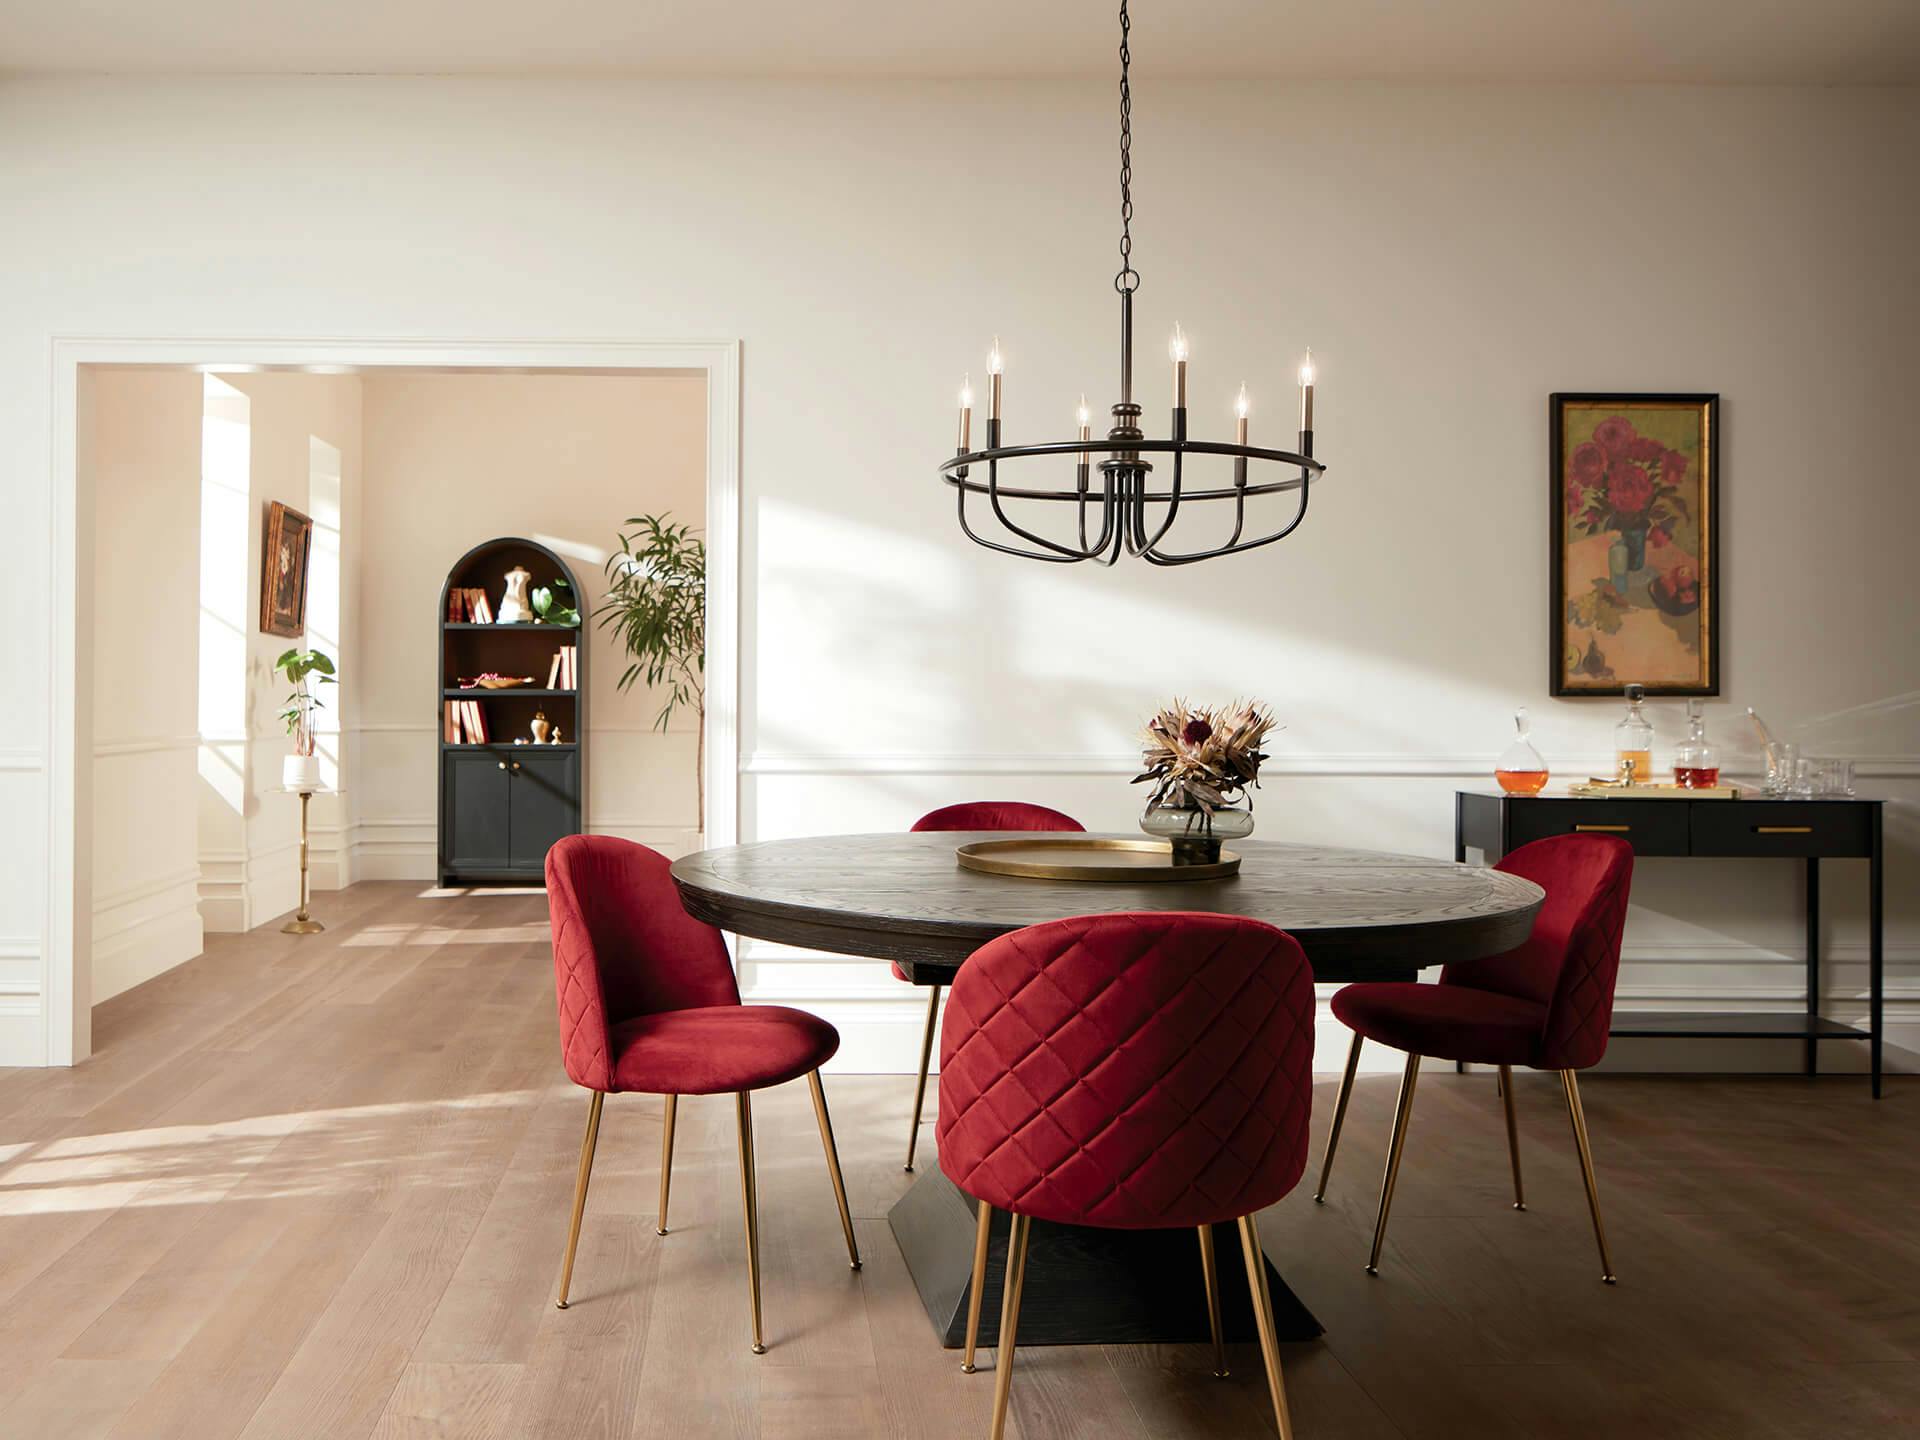 Dining room during the day with red chairs around a circular table featuring a Capitol Hill chandelier in black finish